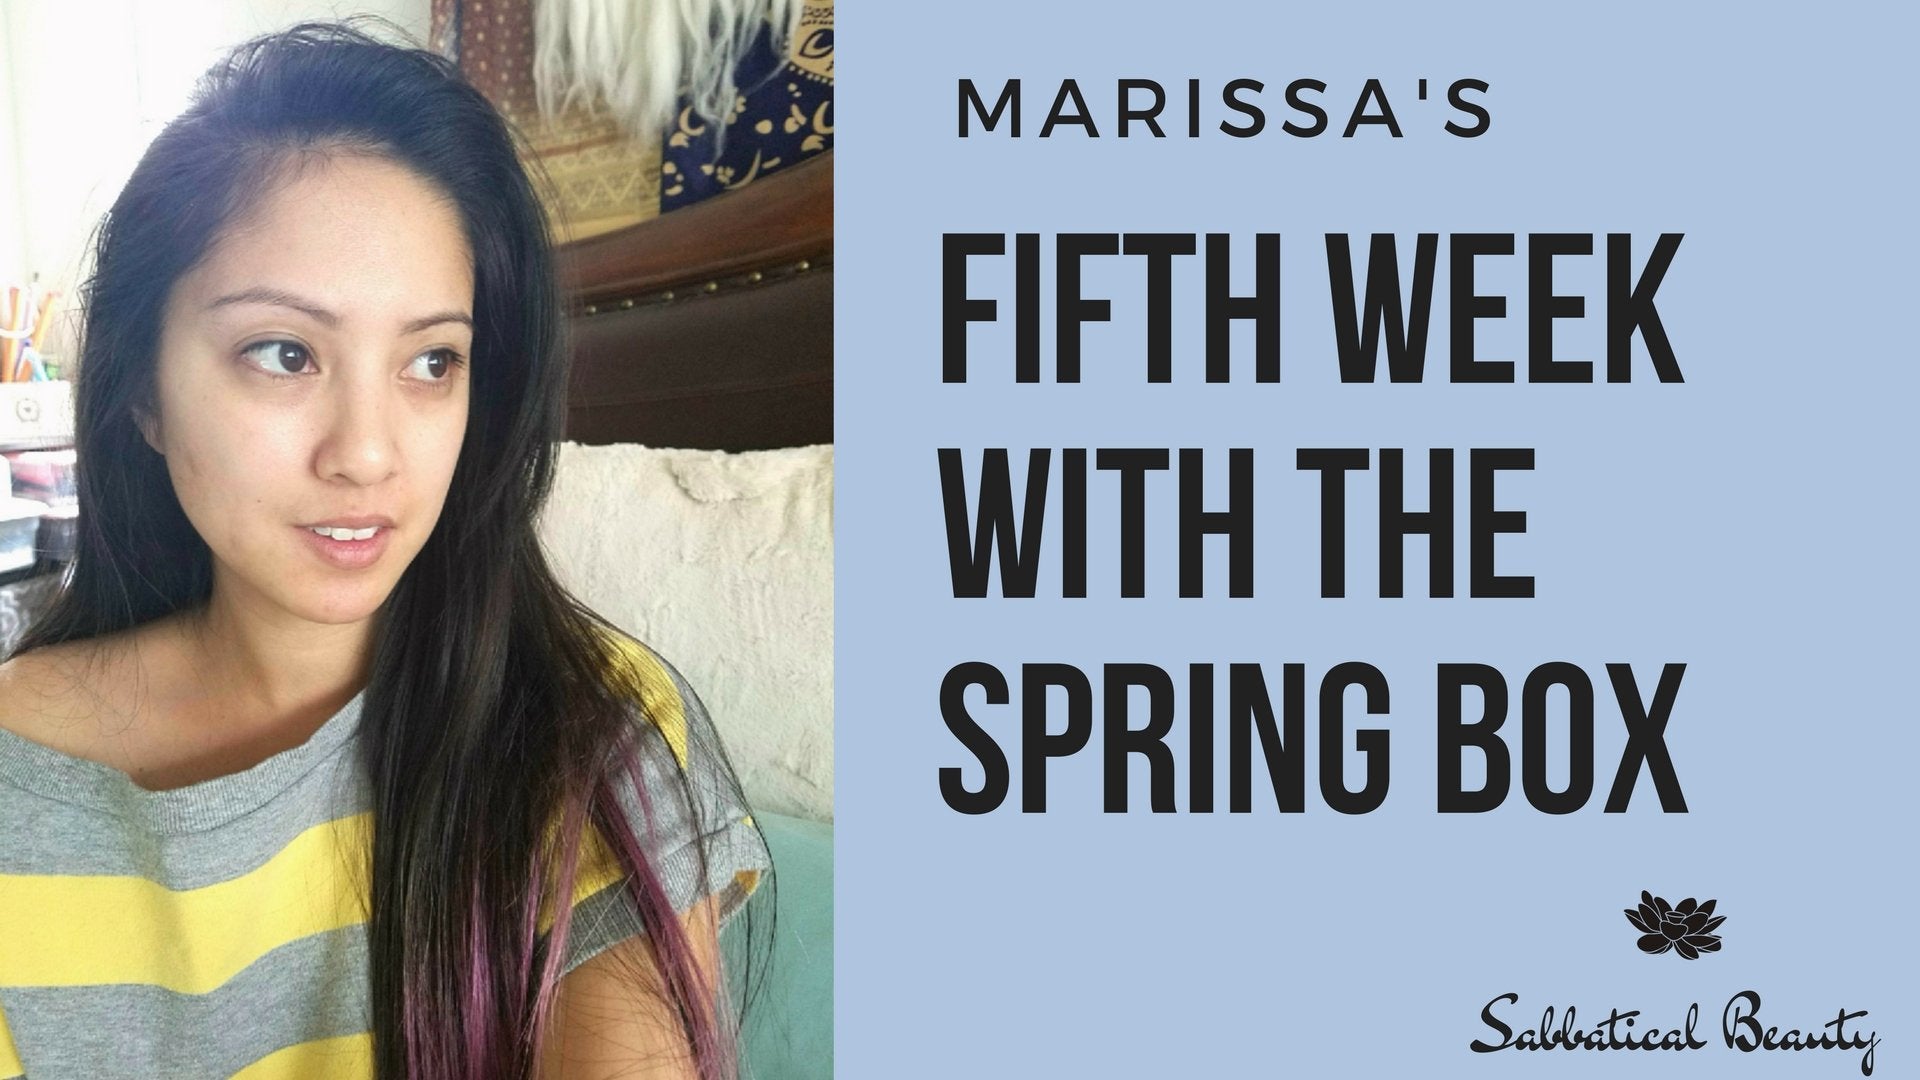 Marissa's Fifth Week With the Spring Box - Sabbatical Beauty